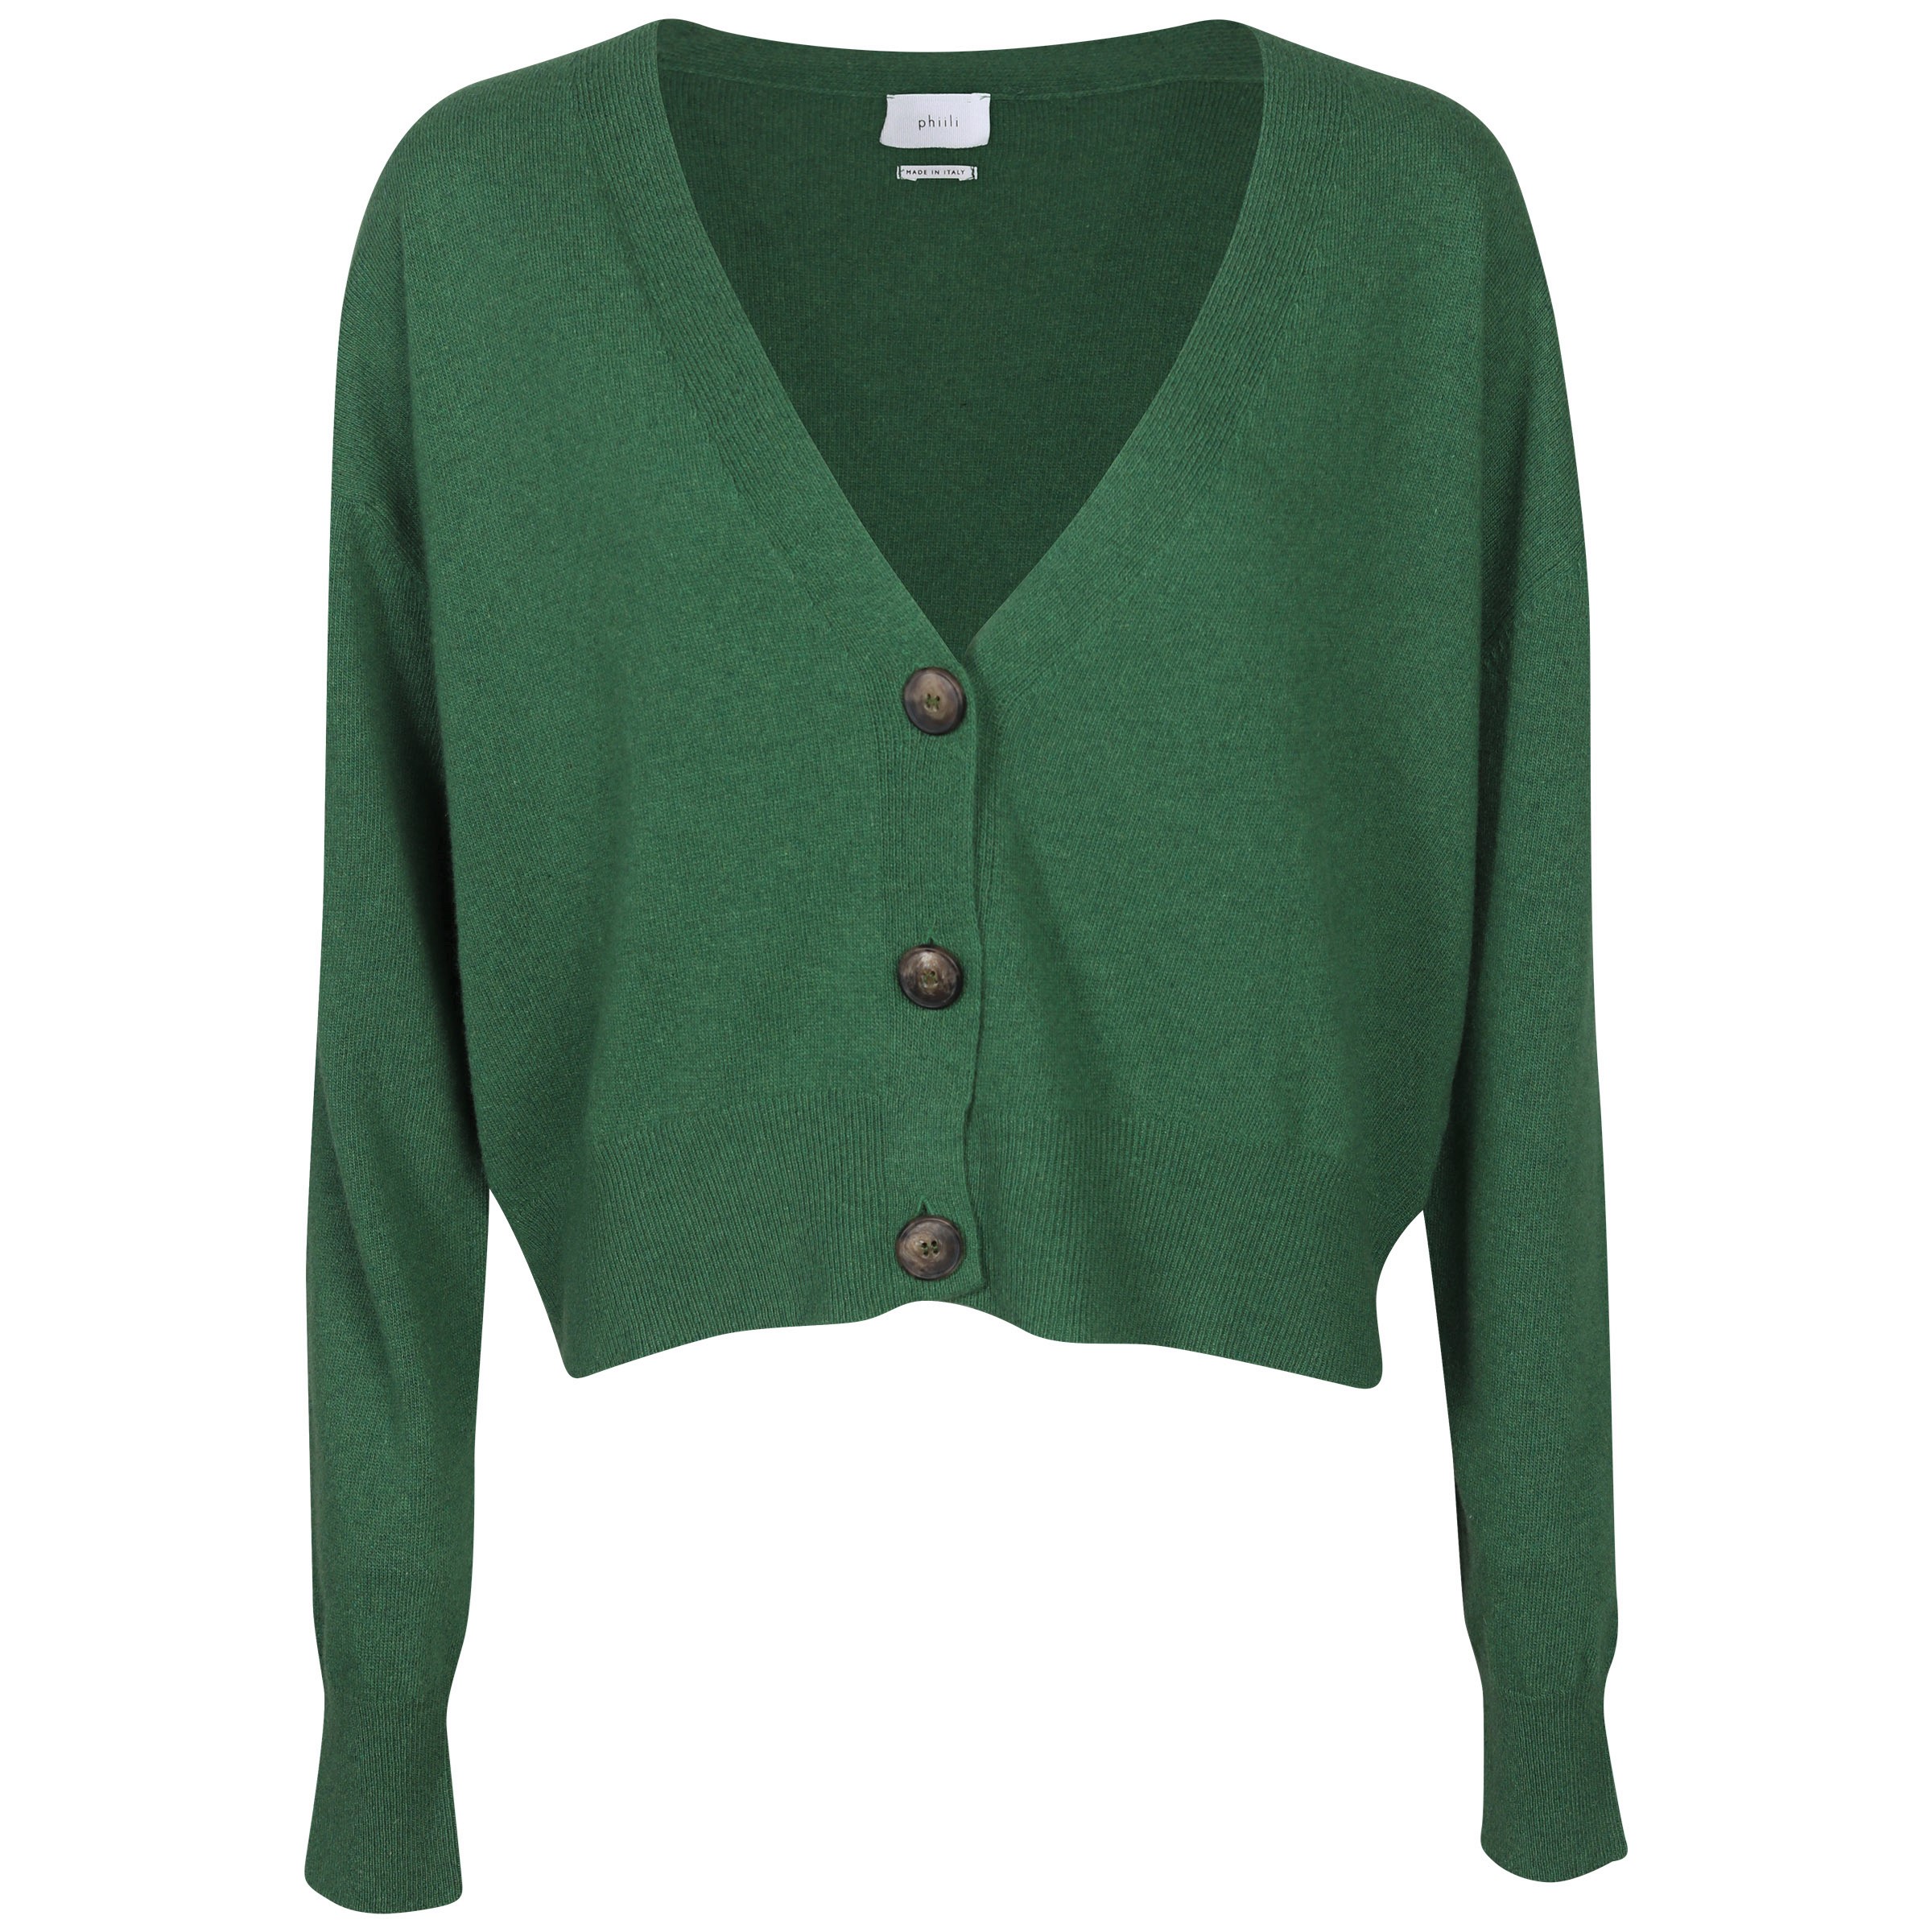 Phiili Recycled Cashmere Cardigan in Green S/M